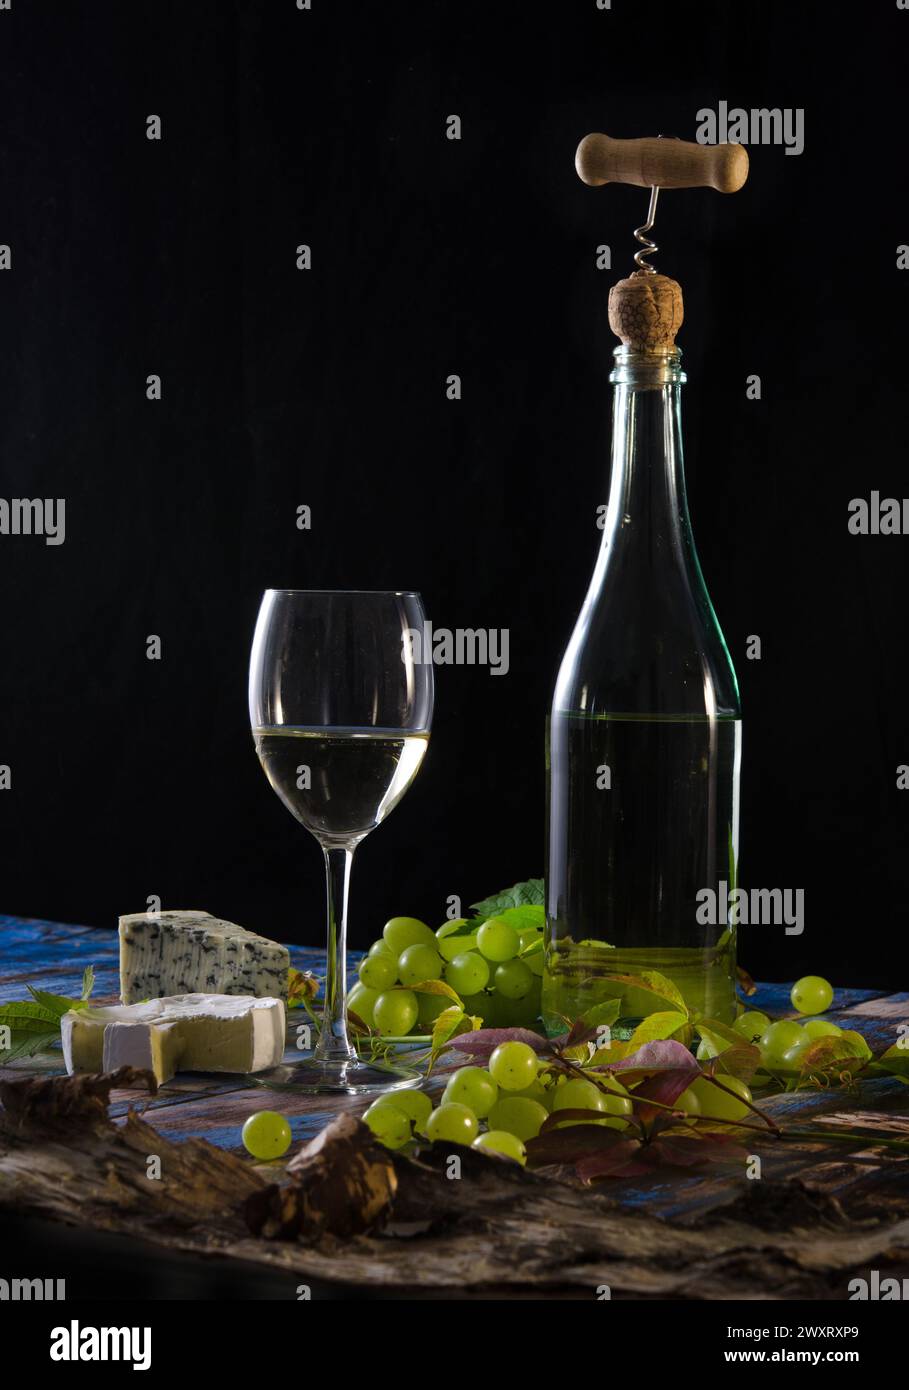 Bottle of wine with corkscrew, wineglass, ble cheese and green grapes on a black background. Stock Photo